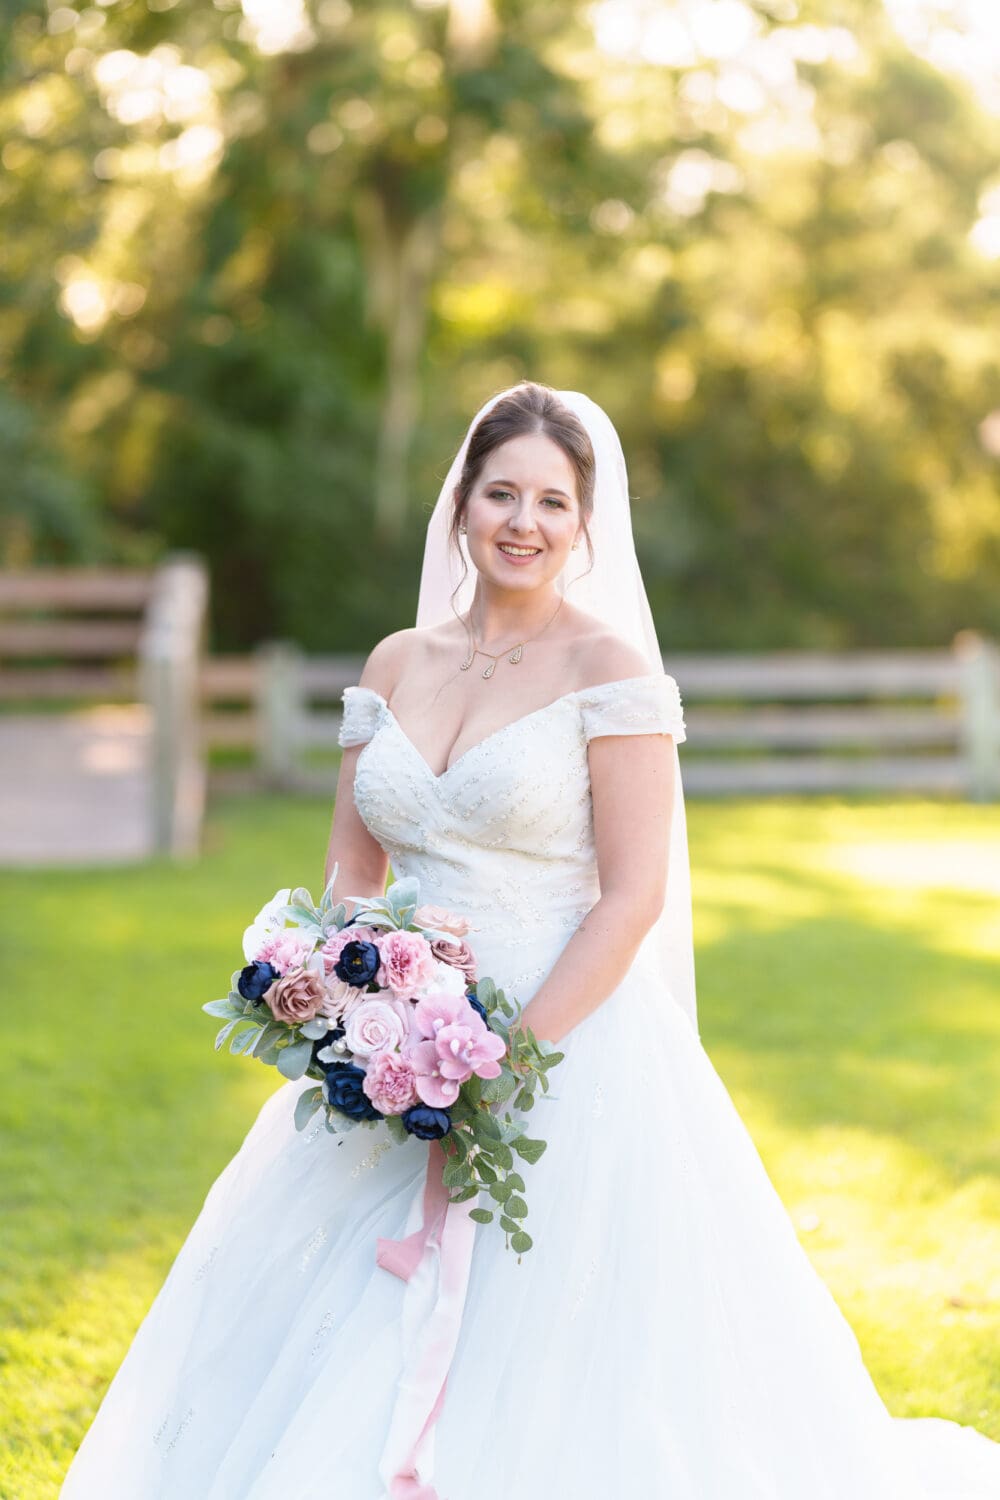 Portraits of the bride after the ceremony - The Pavilion at Pepper Plantation